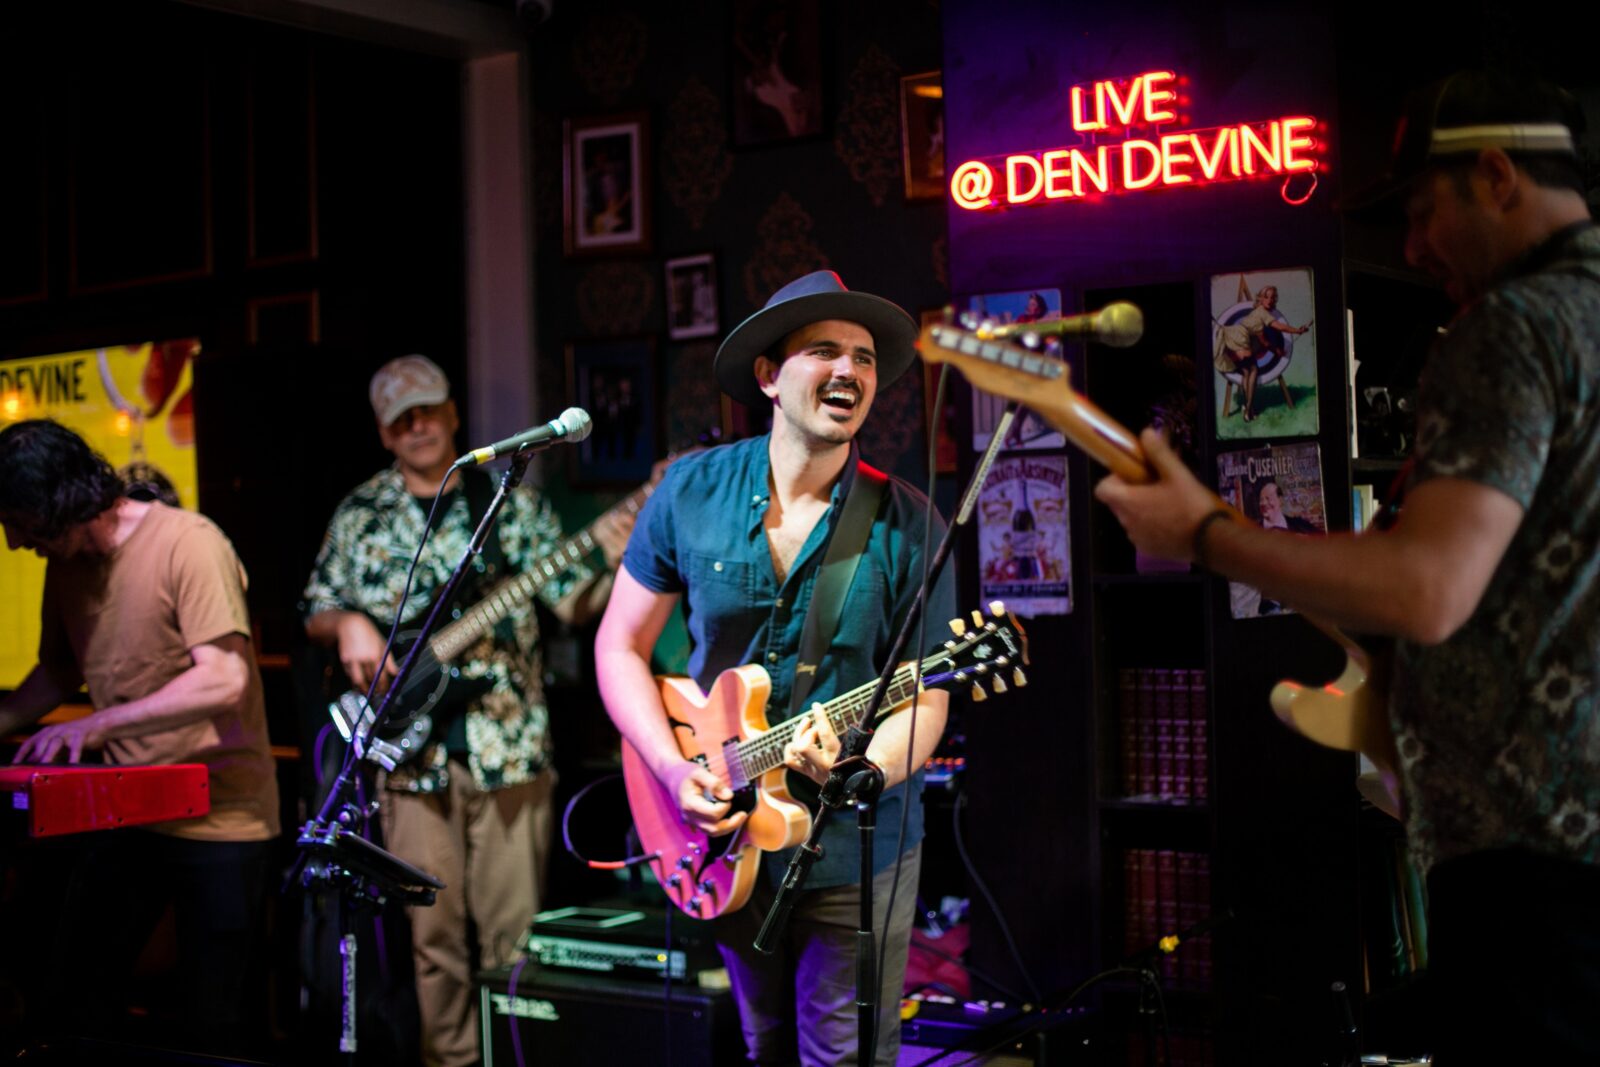 Den Devine's electrifying stage sets the scene for legendary live music, rocking 6 nights a week